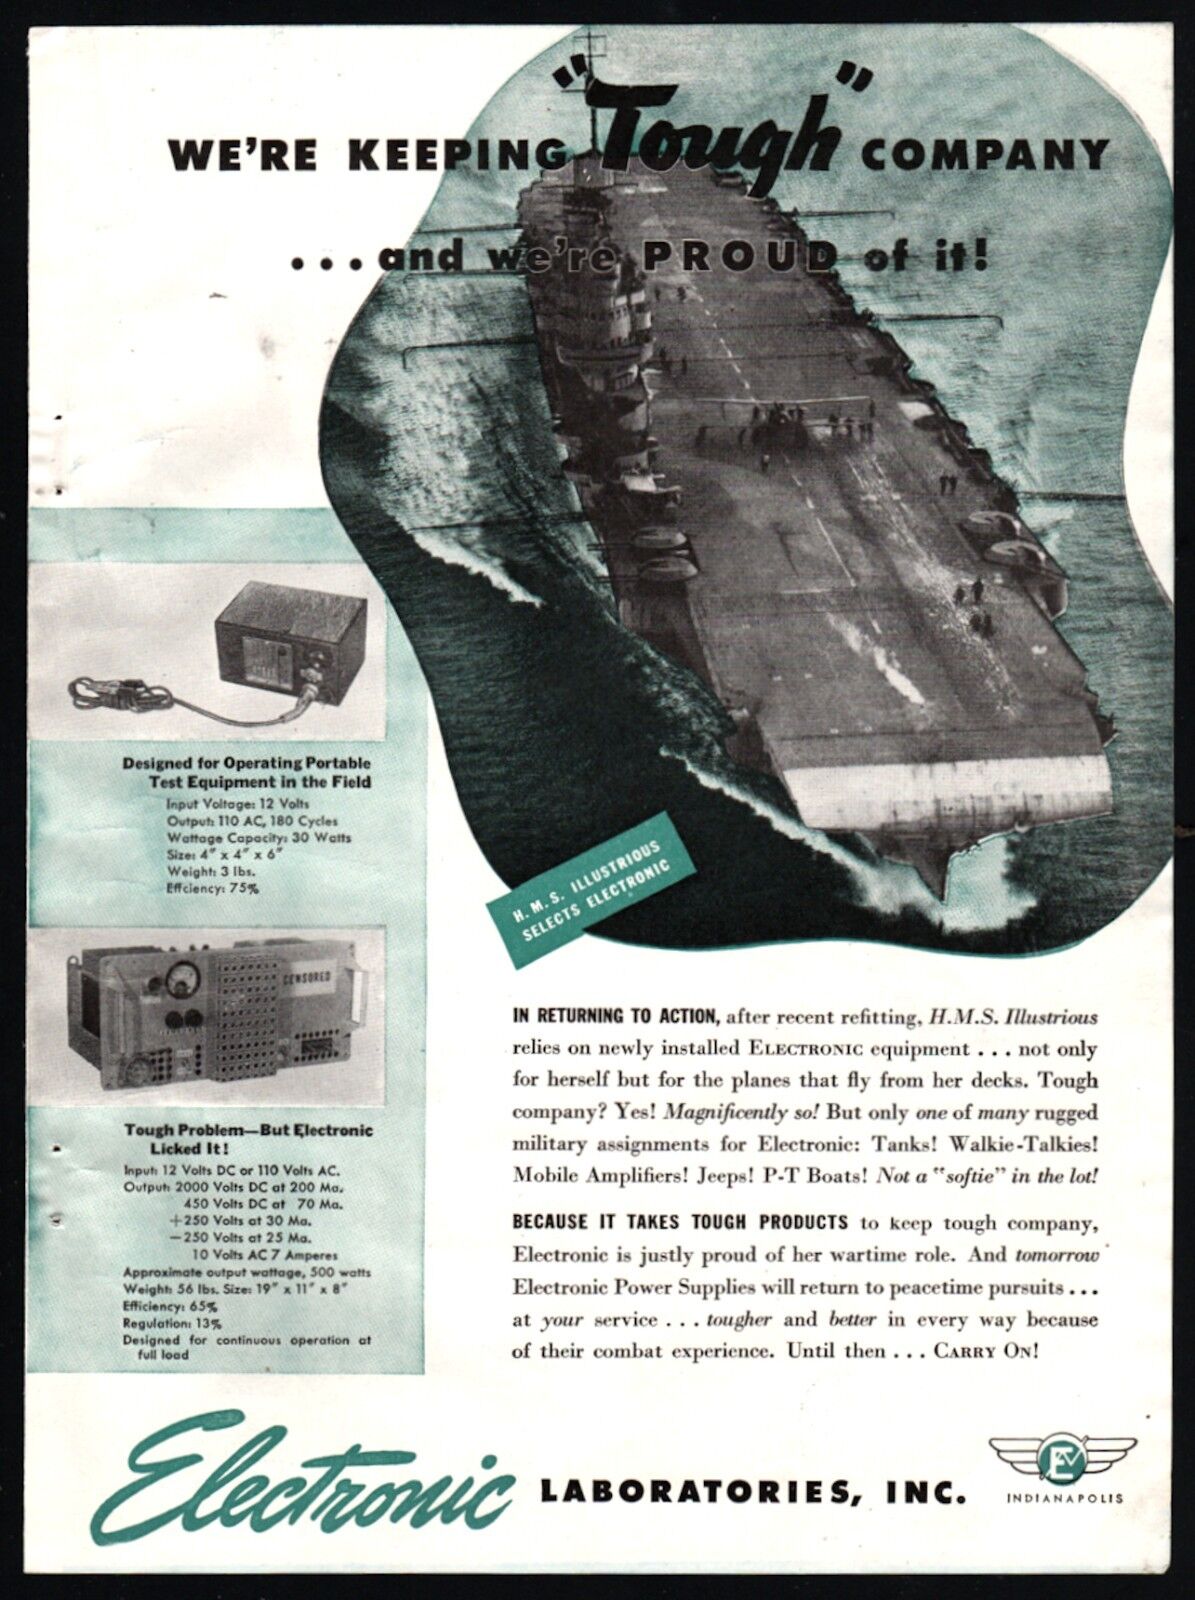 1943 WWII H.M.S. ILLUSTRIOUS British Aircraft Carrier Electronic Labs AD